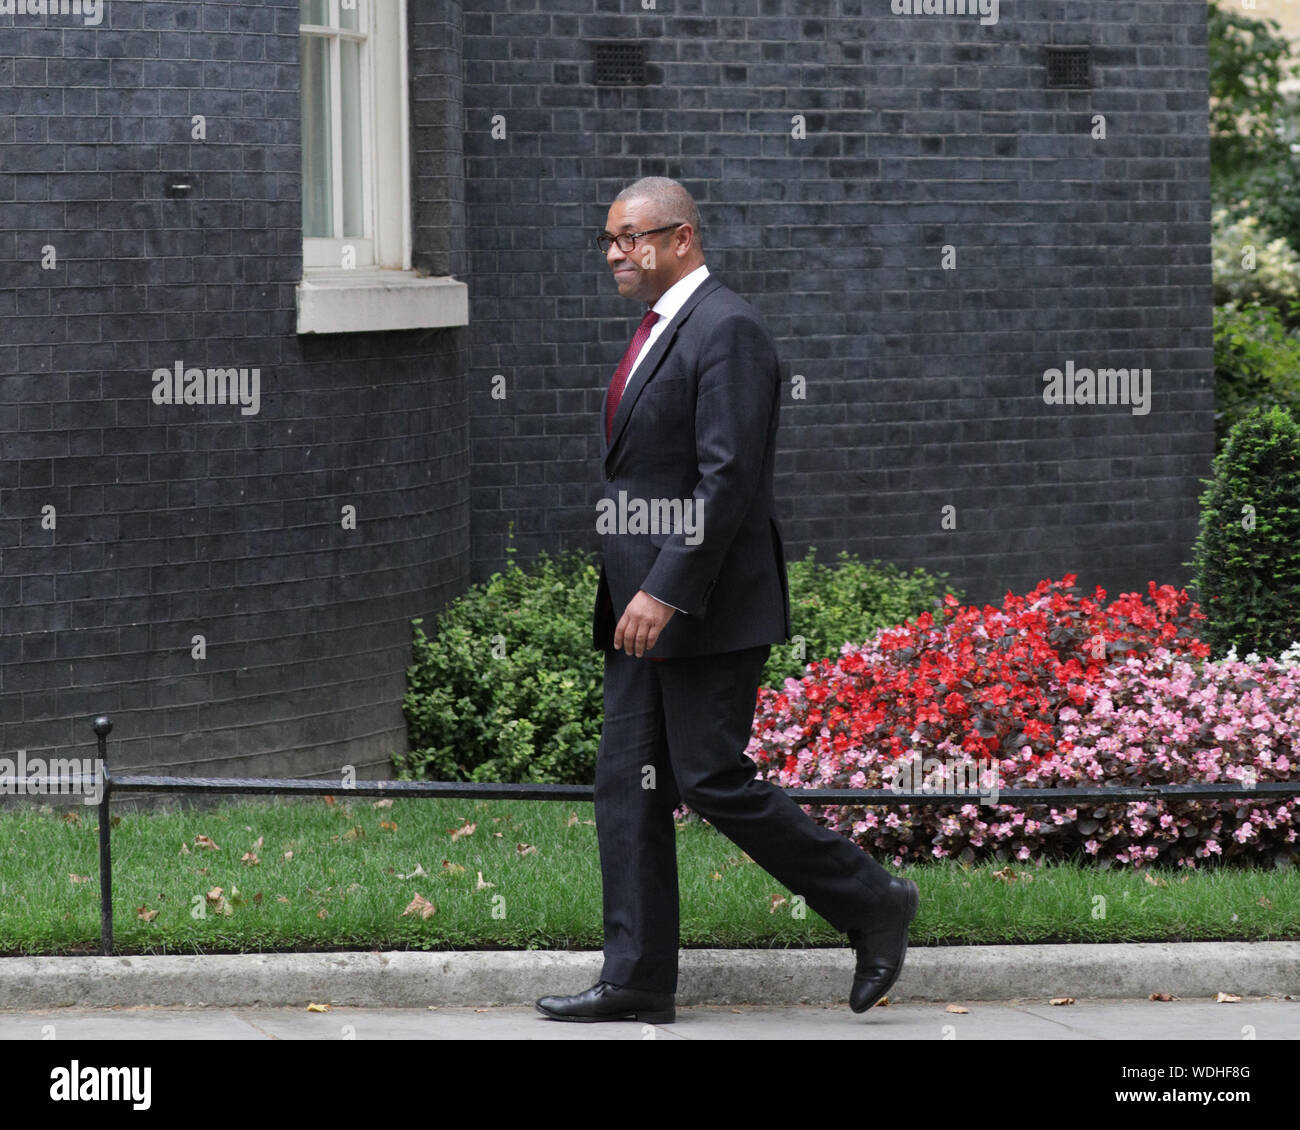 Westminster, London, UK. 29th Aug, 2019. James Cleverly, Conservative Party Chairman, enters No 10 Downing Street this evening. Credit: Imageplotter/Alamy Live News Stock Photo